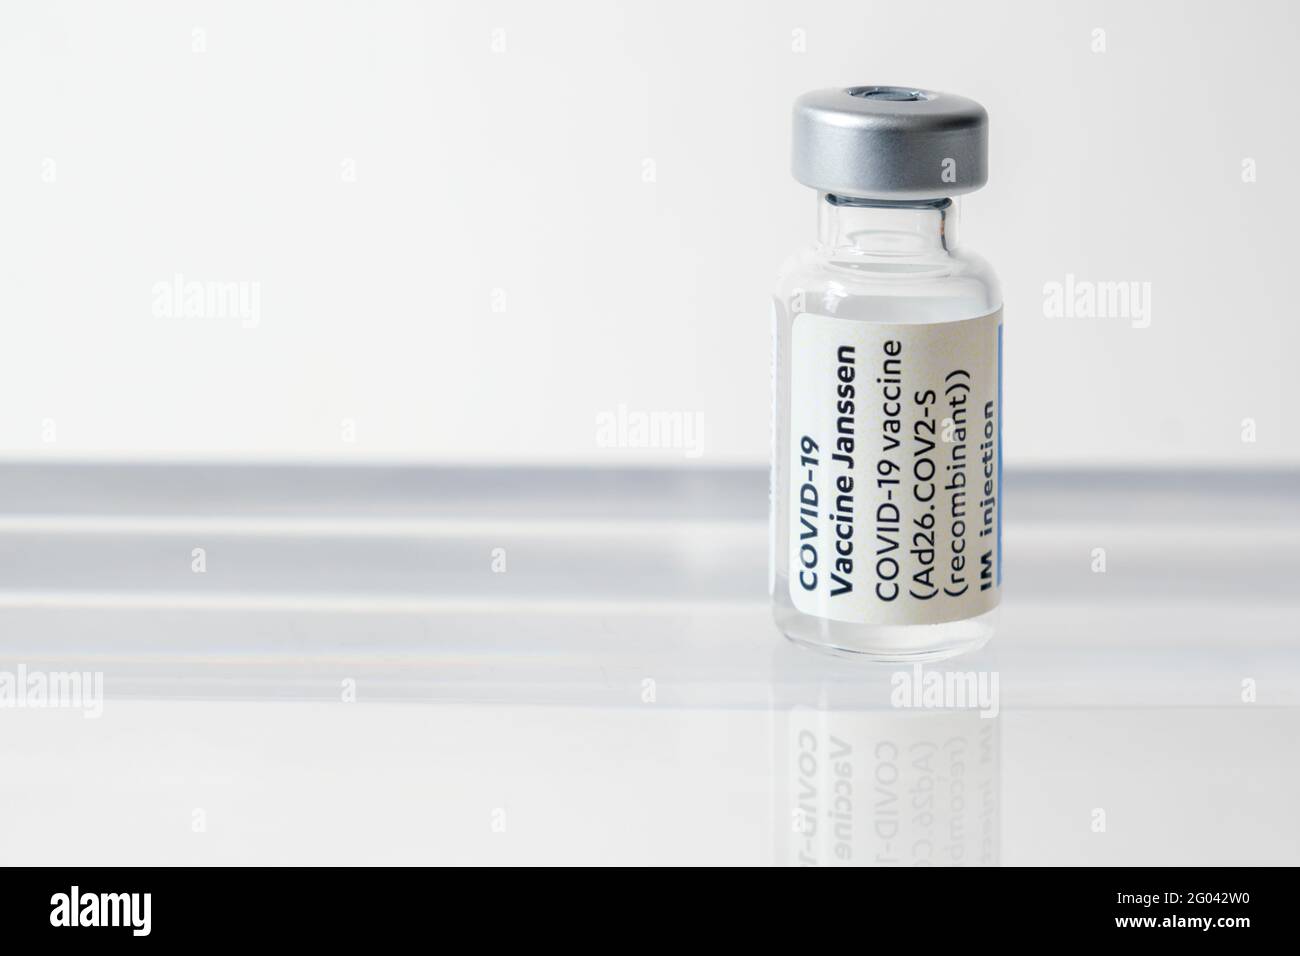 Montreal, CA - 31 May 2021: Vial of Janssen Covid-19 vaccine Stock Photo